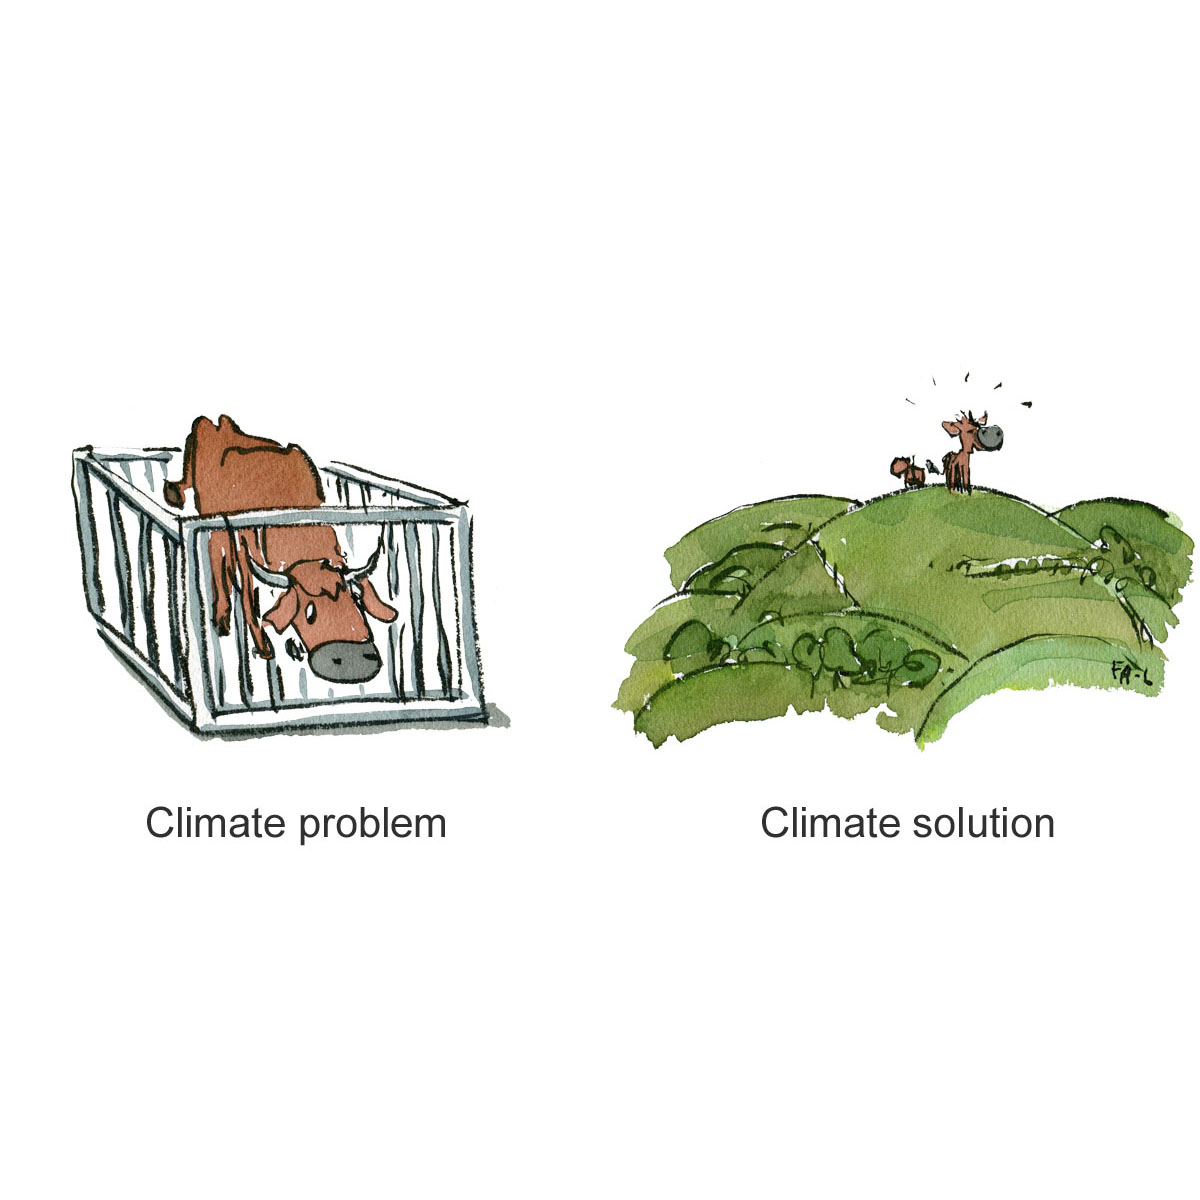 Drawing of cow locked up, and alternative drawing of cows in an open landscape. Illustration by Frits Ahlefeldt